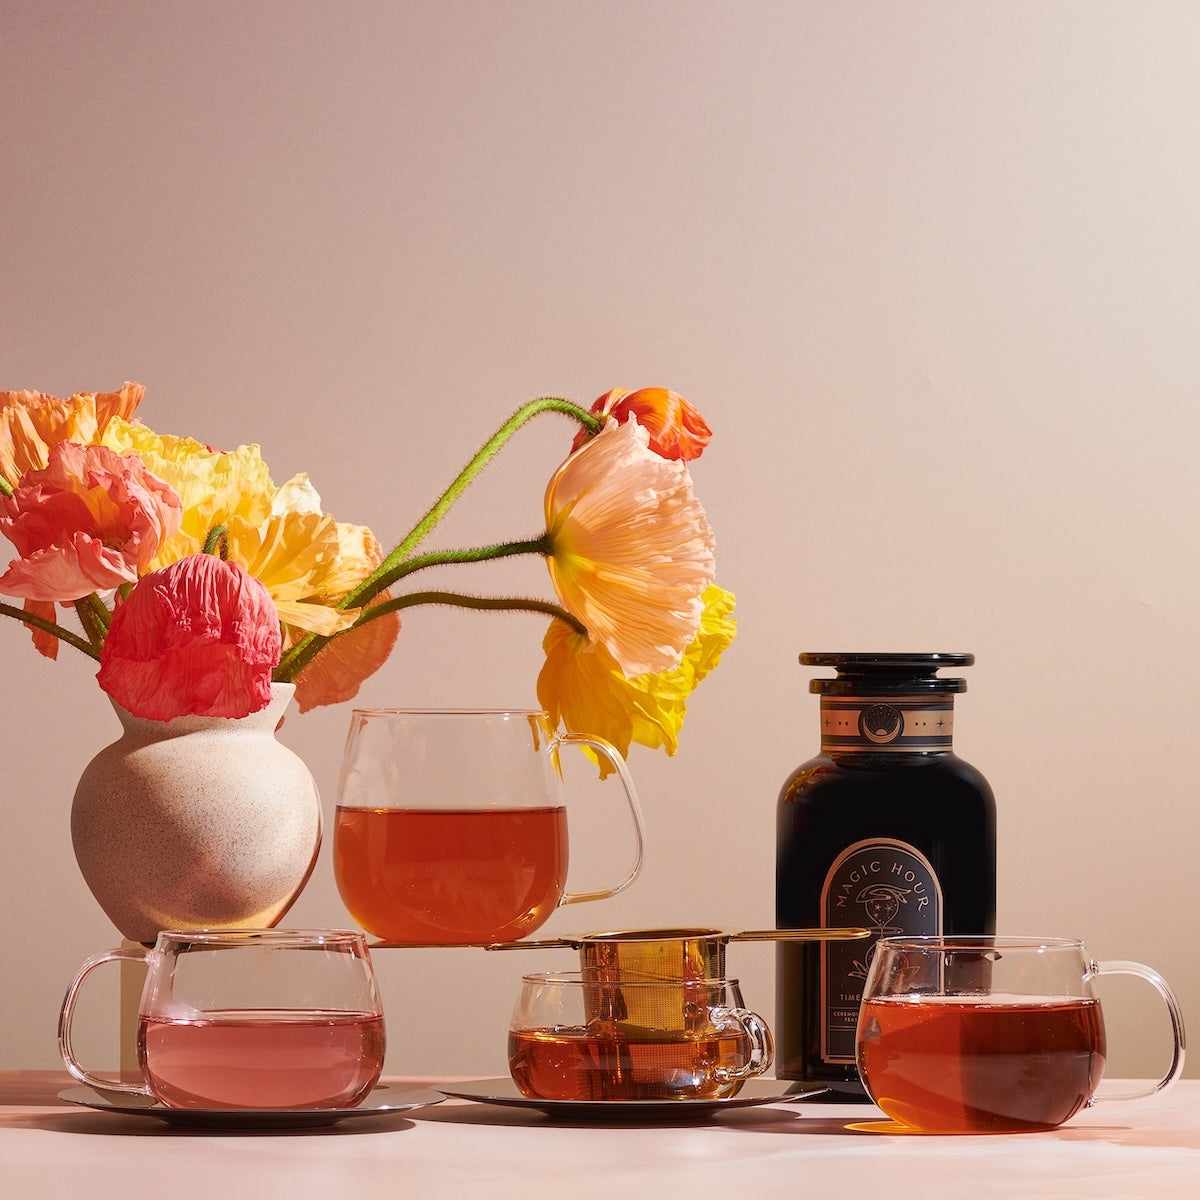 A still life image features a vase with colorful flowers, four Kinto Glass Tea Cups filled with different shades of organic tea, and a bottle of Magic Hour Tea. The background is softly lit with a warm tone, creating a cozy and inviting atmosphere.